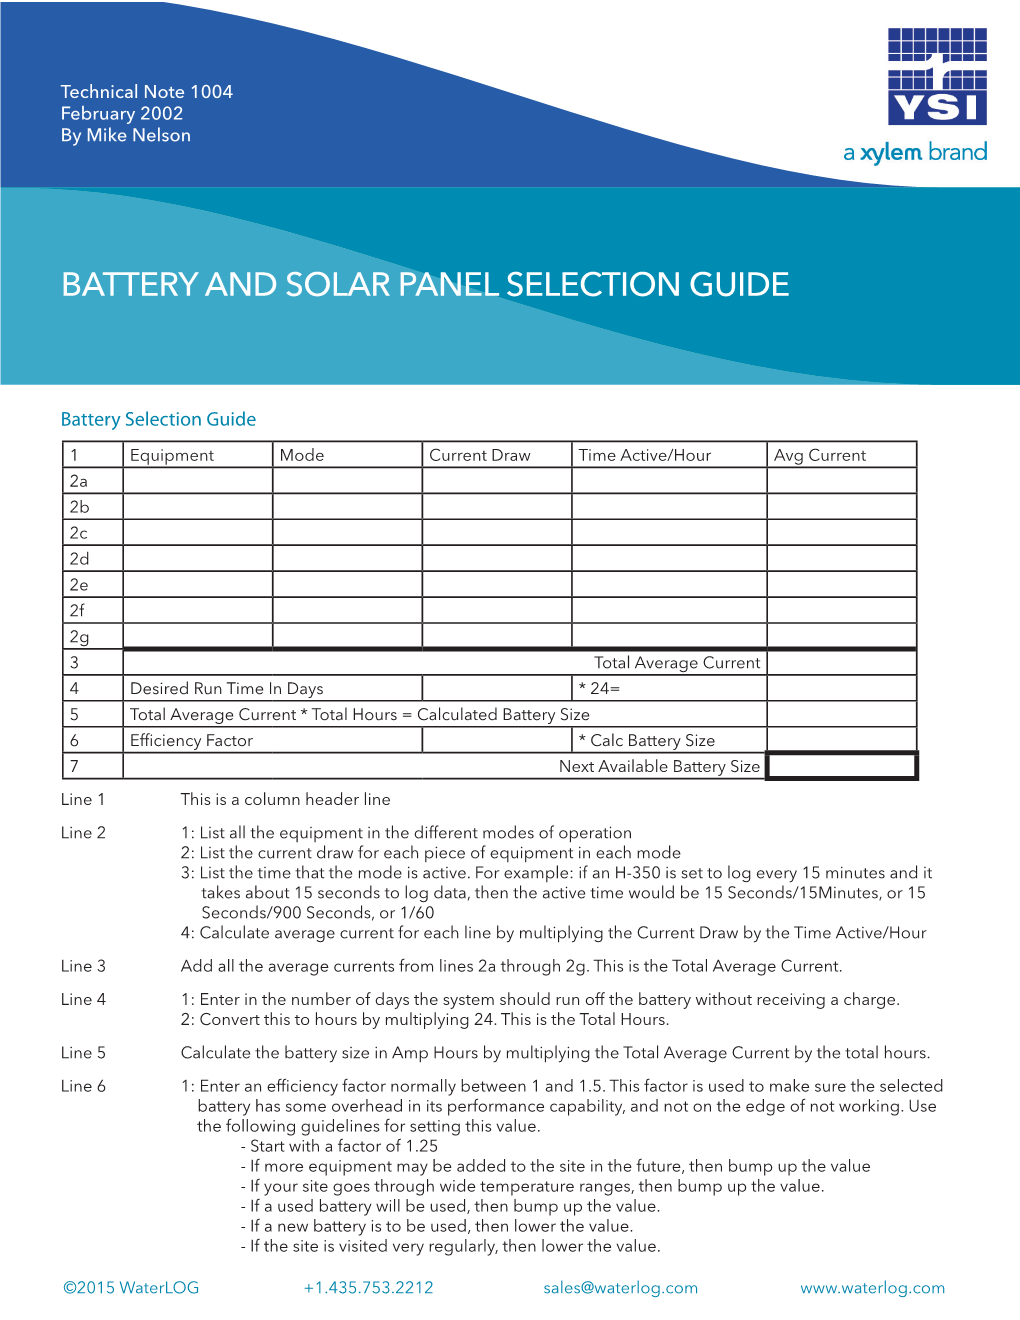 Waterlog Battery and Solar Panel Selection Guide